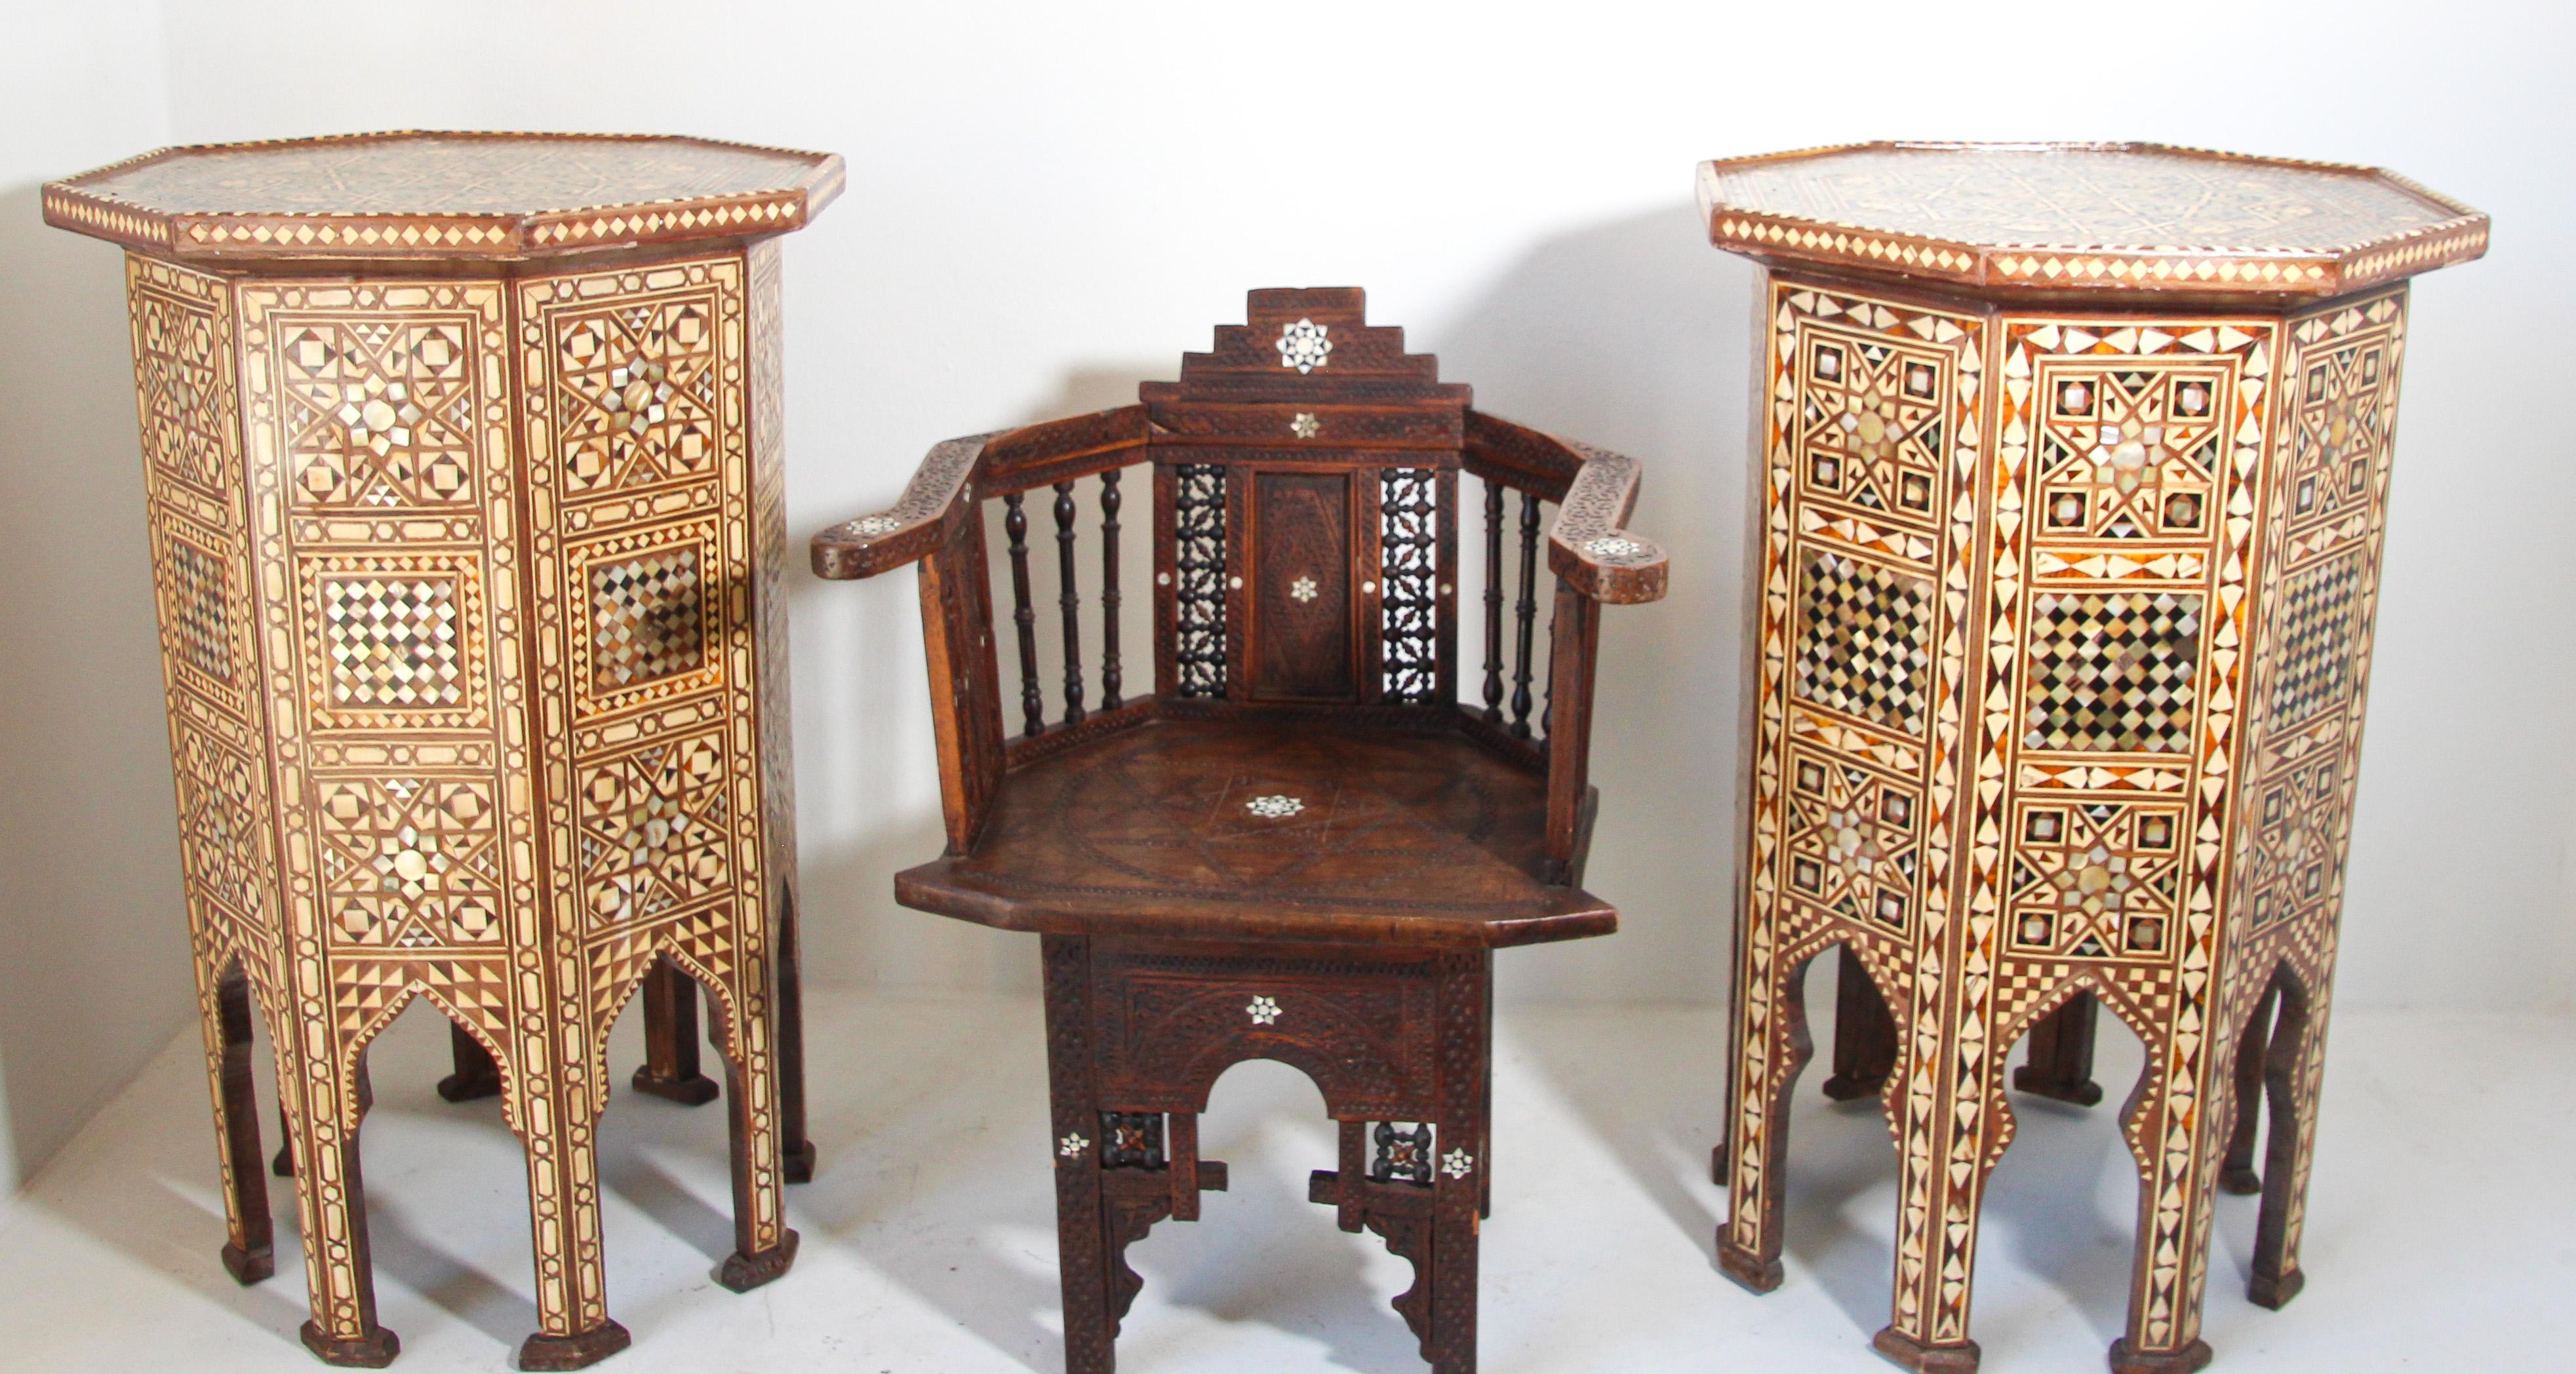 Moorish Moroccan Octagonal Pedestal Tables Inlaid with Mosaic Marquetry In Good Condition For Sale In North Hollywood, CA